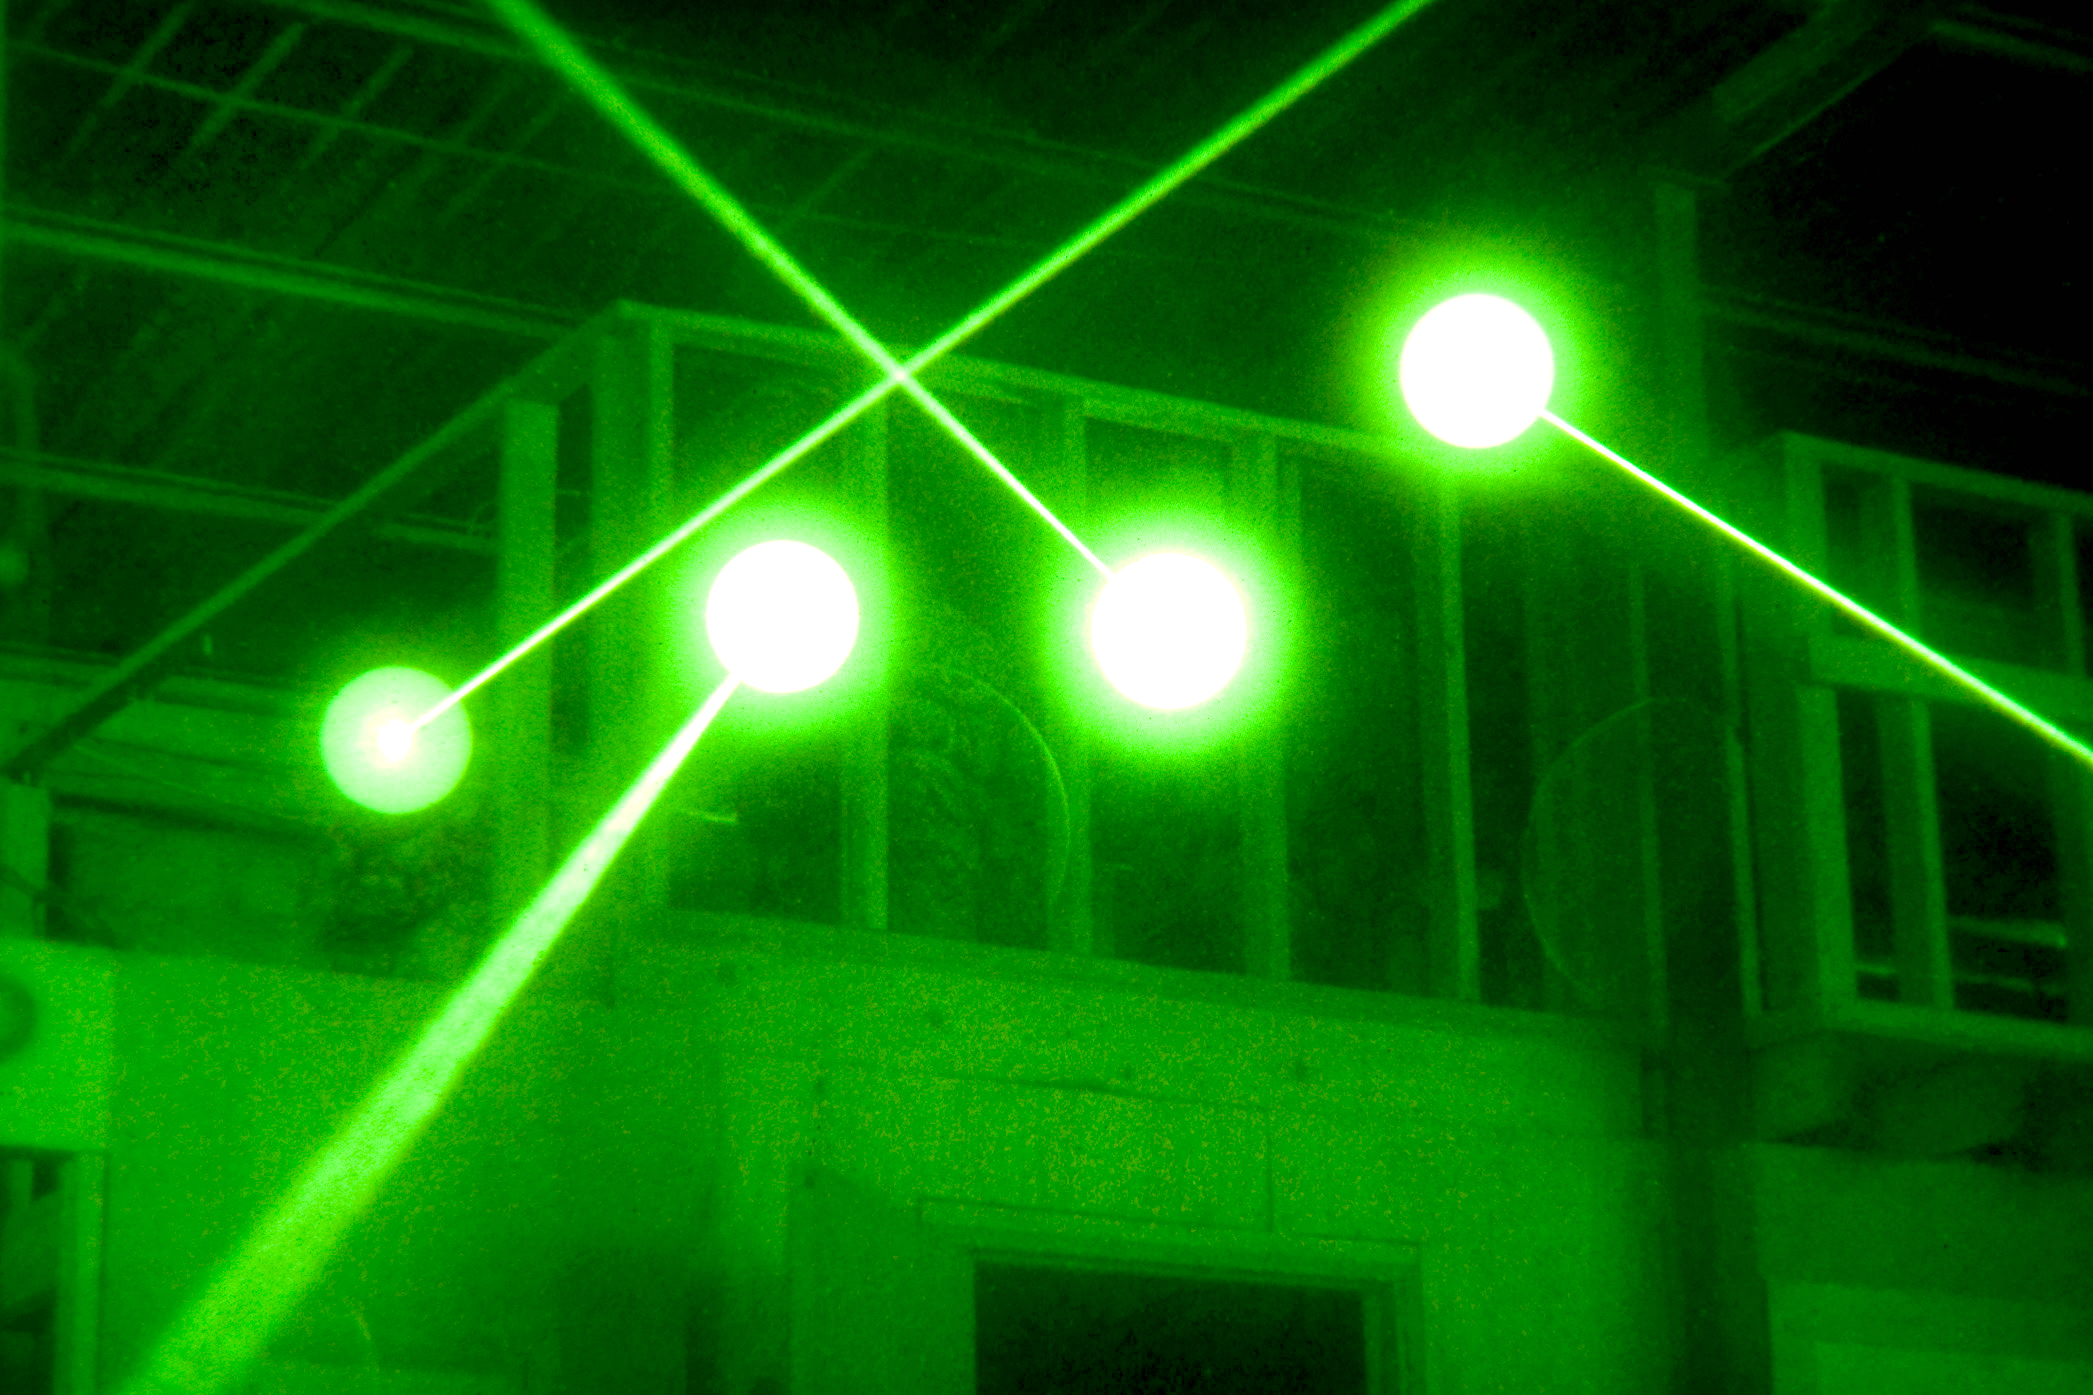 infrared lasers